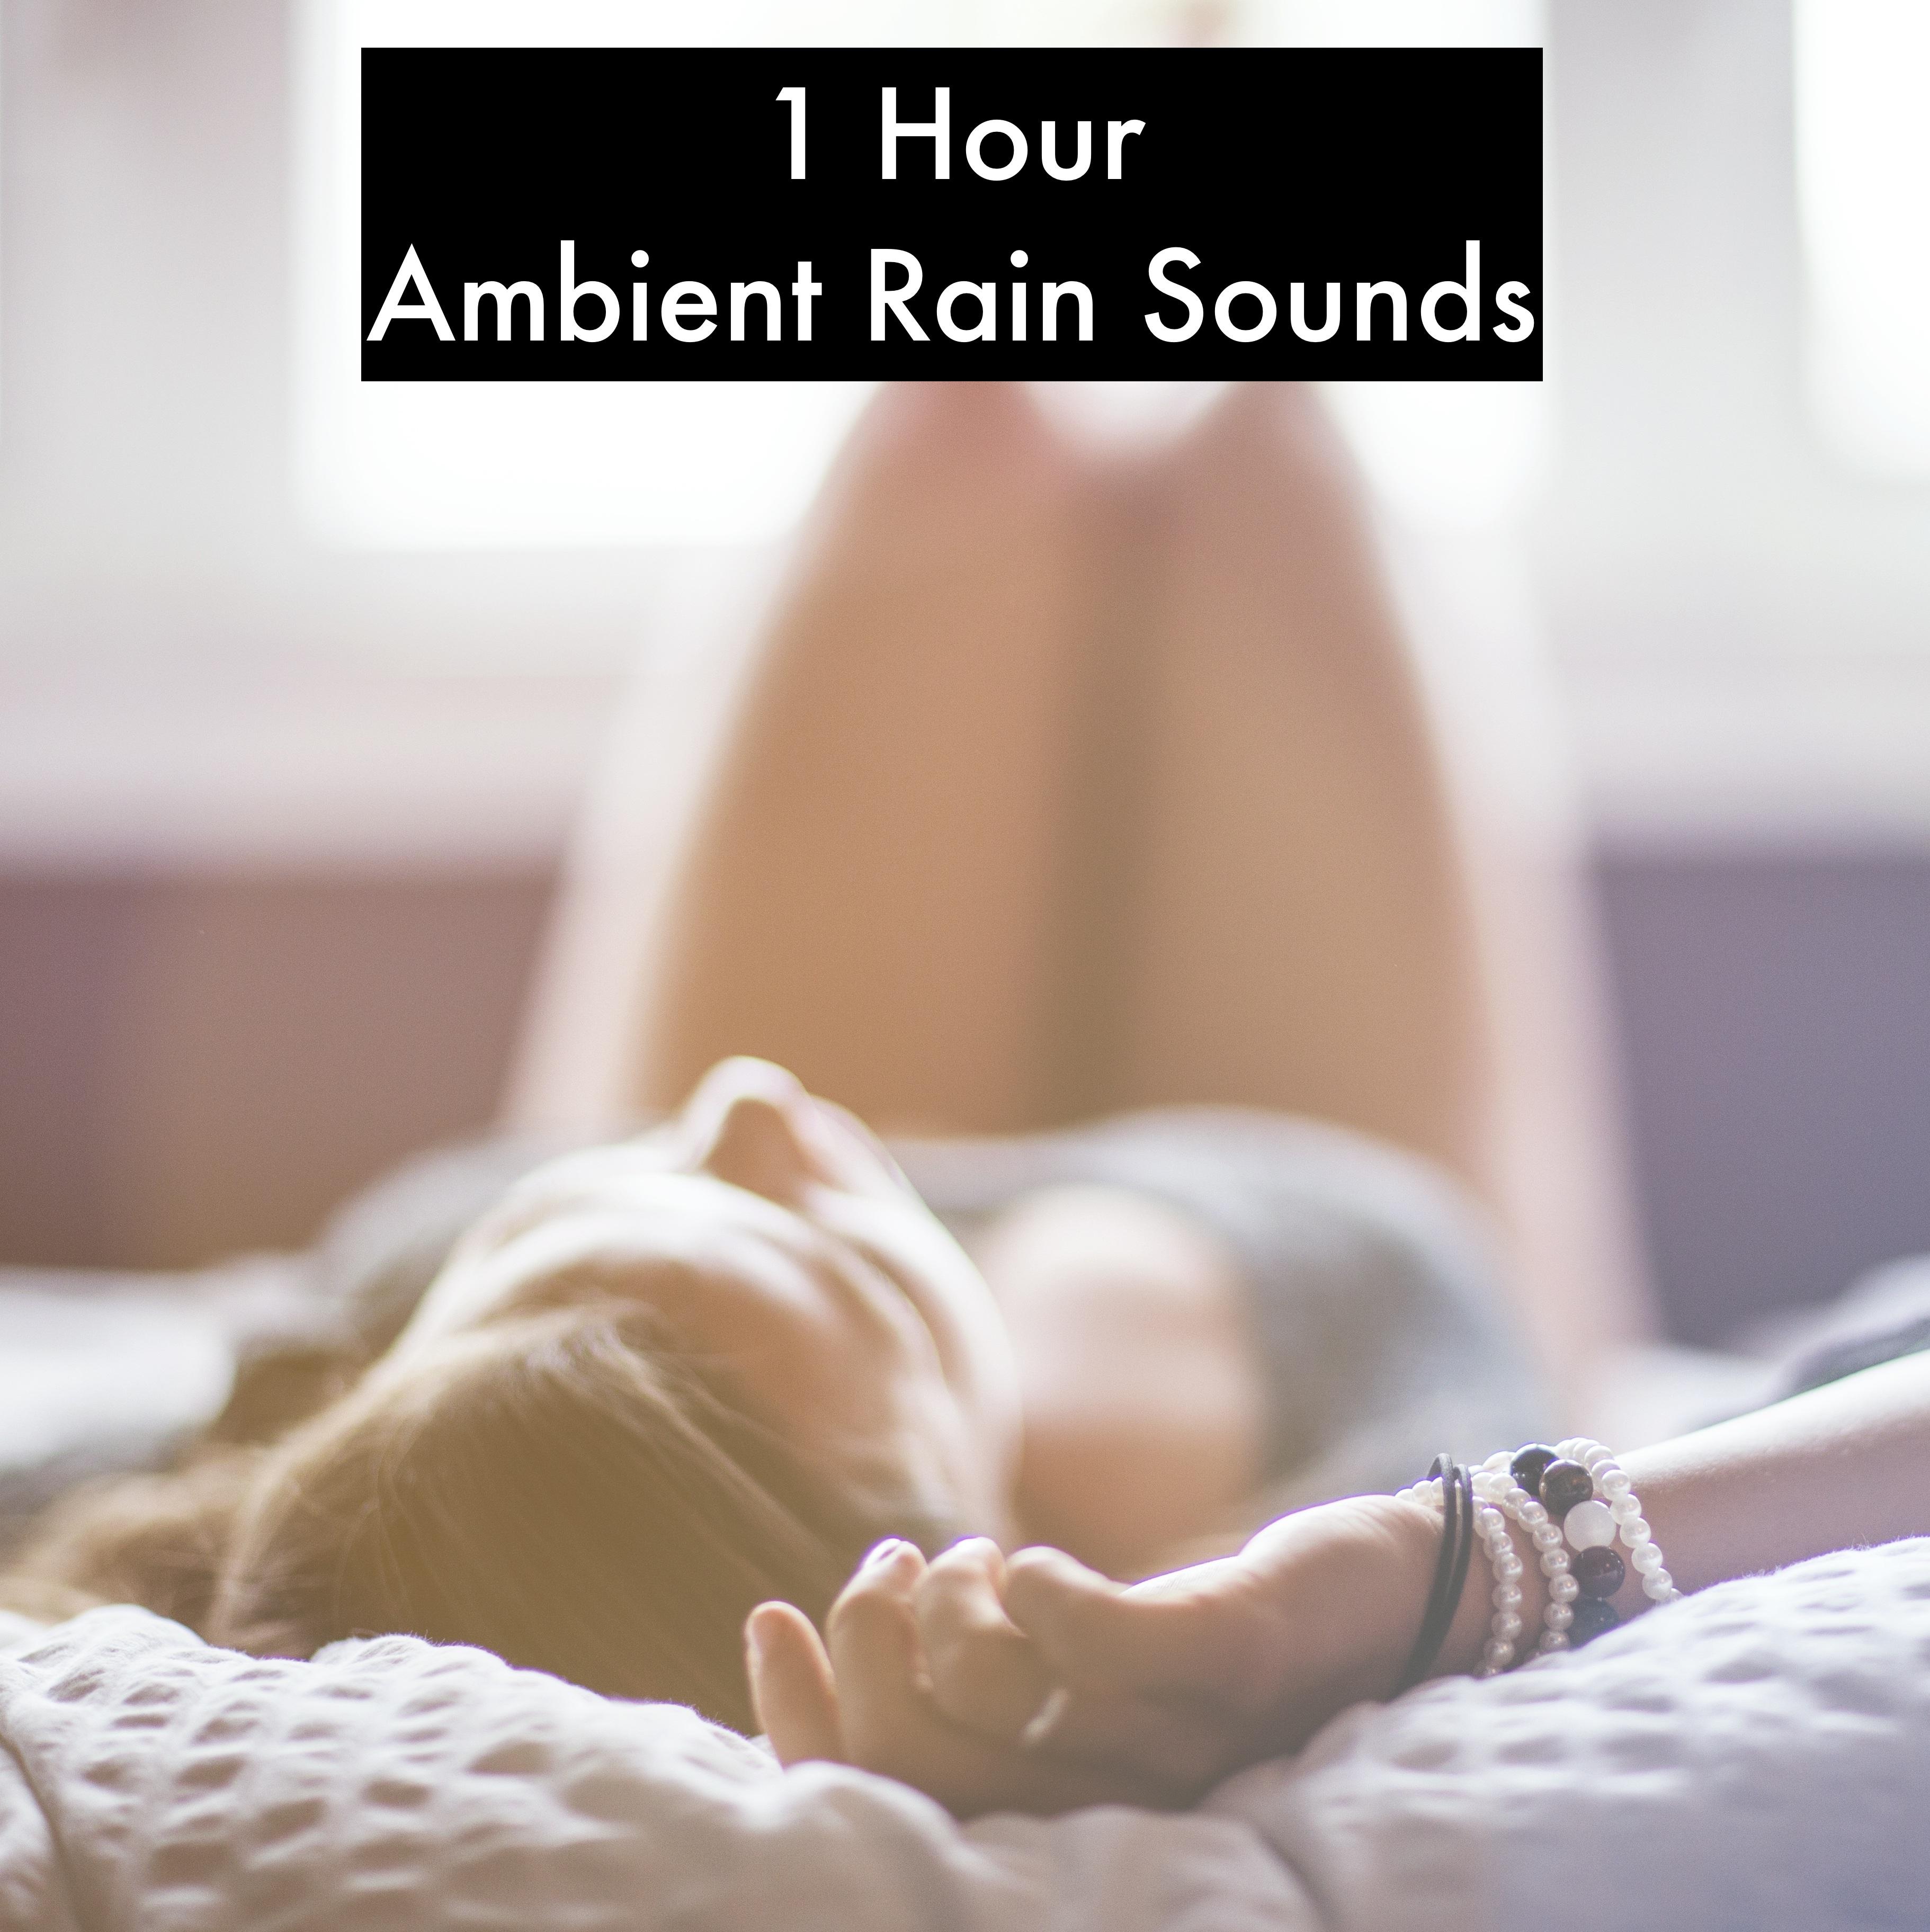 1 Hour Ambient Rain Sounds from Around the World - Loopable